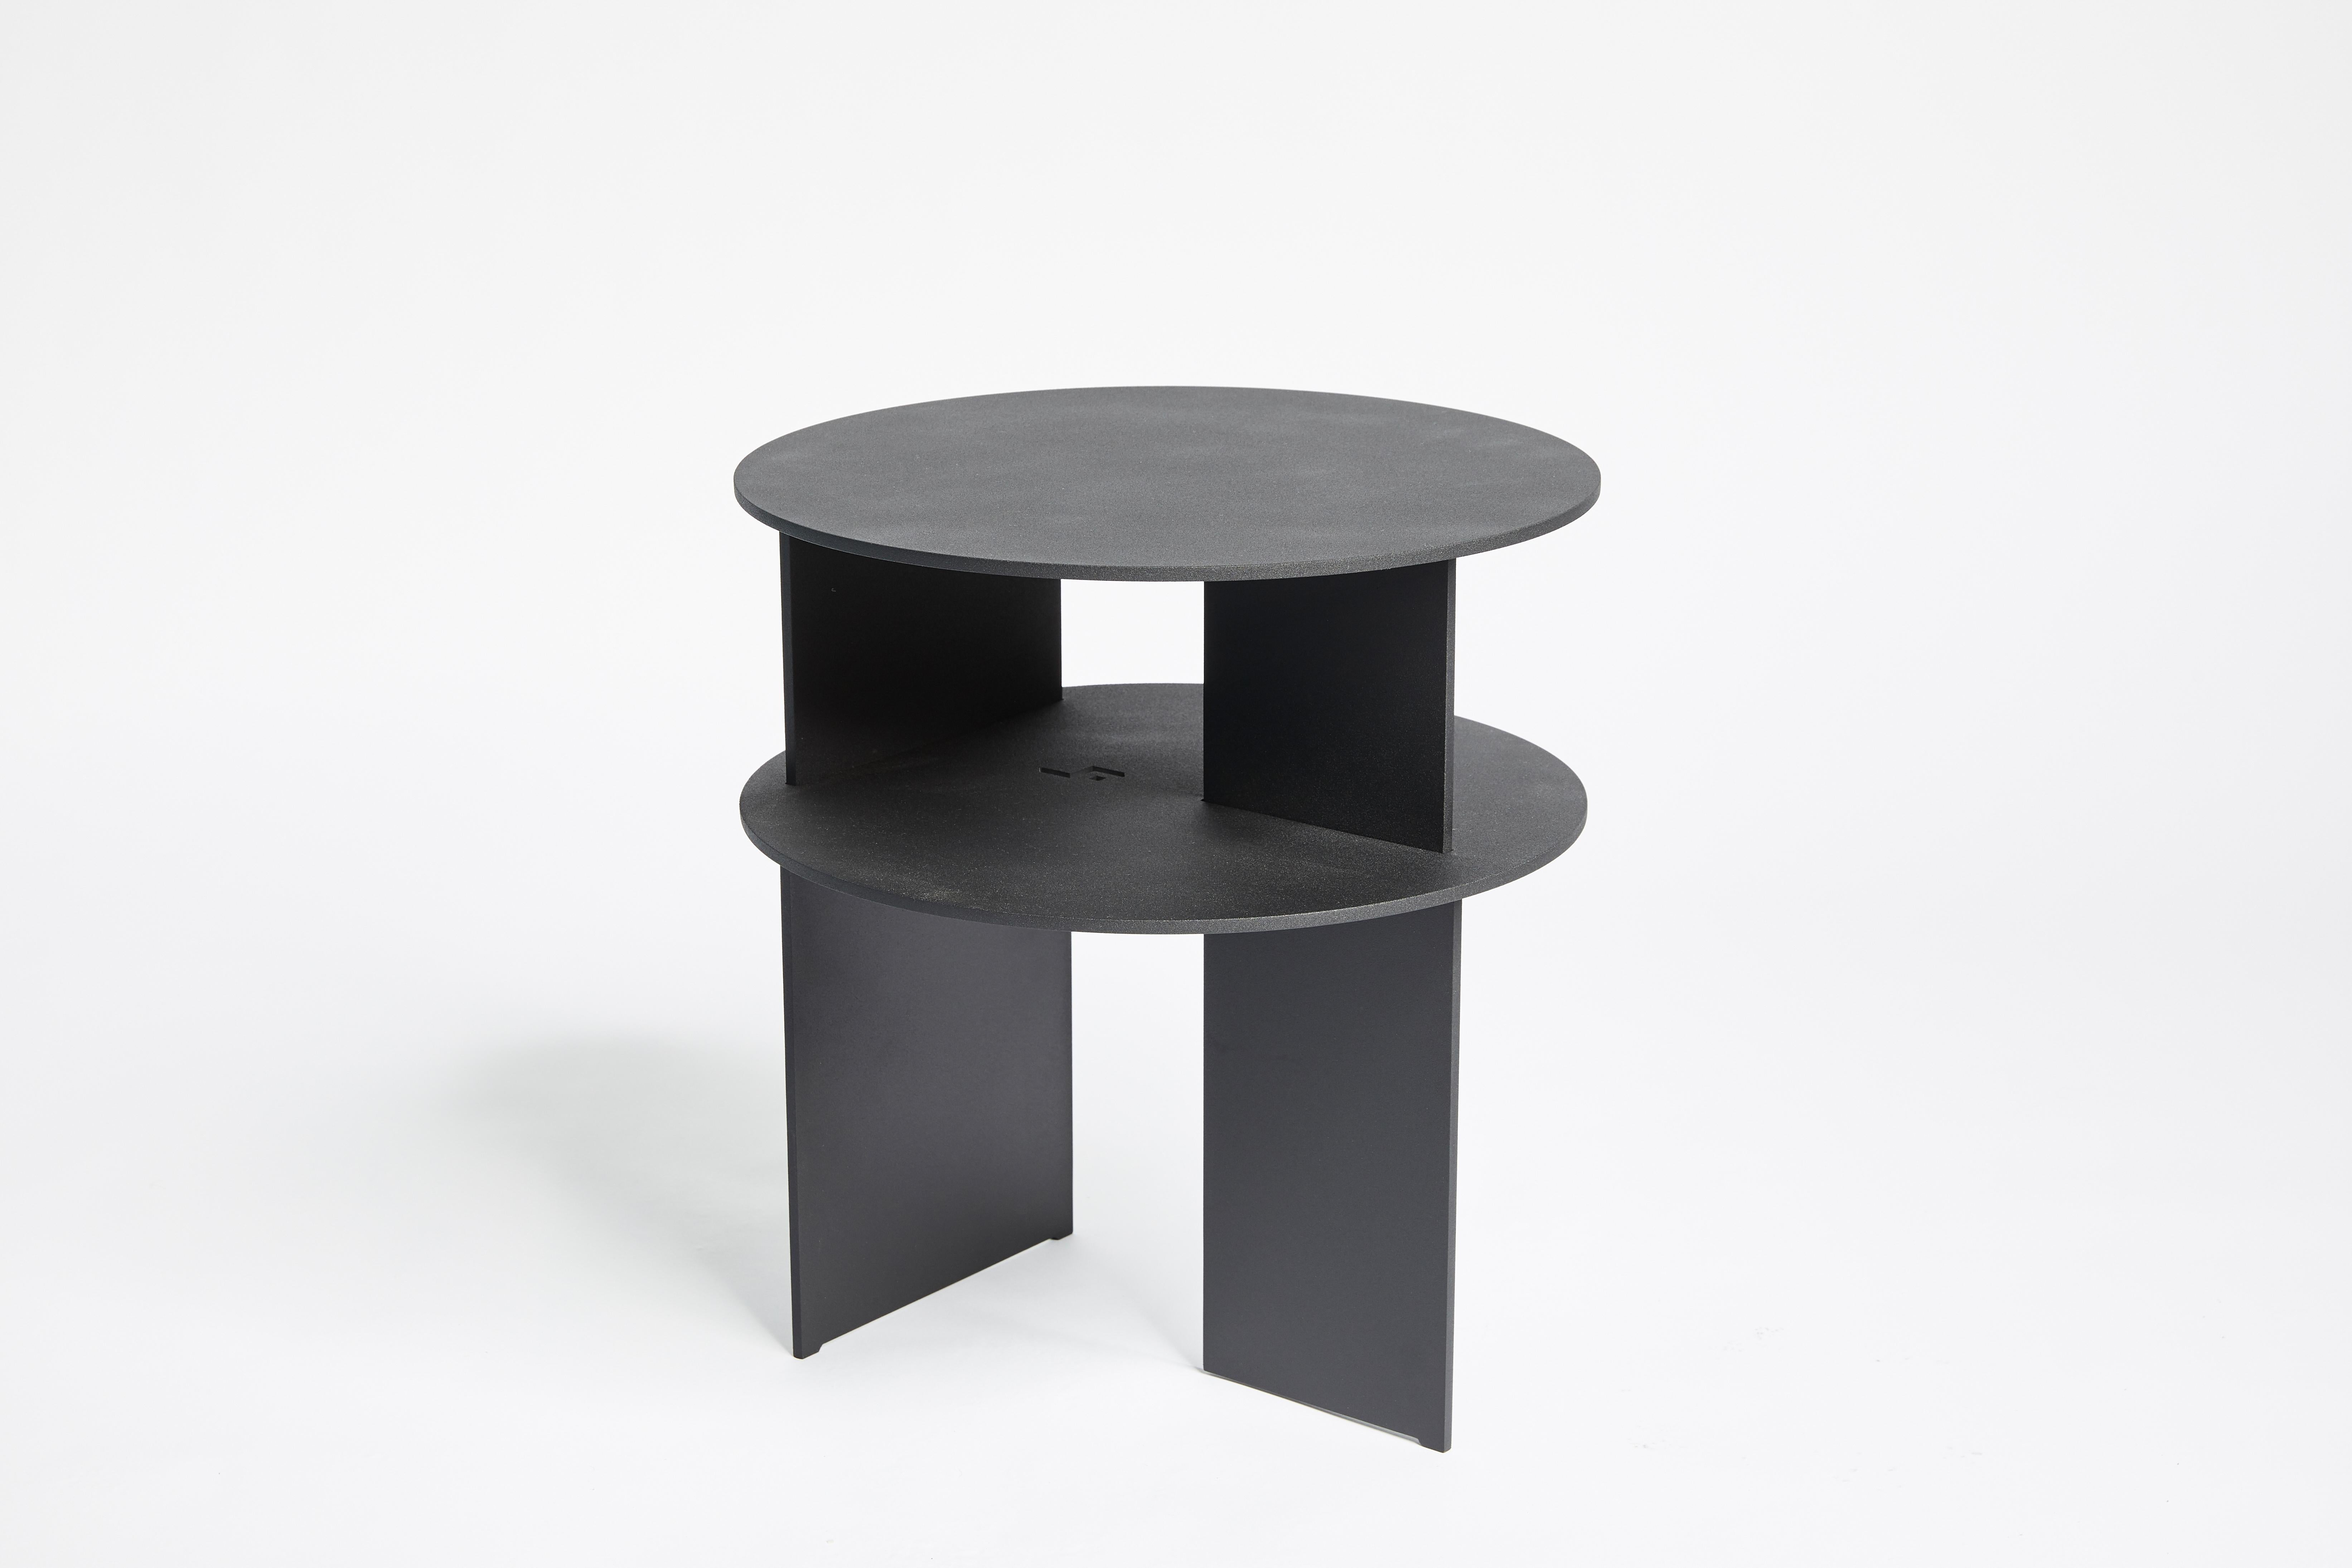 Sanora Side Table by Ben Barber Studio
Dimensions: Ø 40.6 x 45.72 cm
Materials: aluminum powder coat

Custom sizing upon request.
Custom finishes upon request.

Two-teir table constructed from precision cut 1/4” aluminium. Powder-coated to produce a